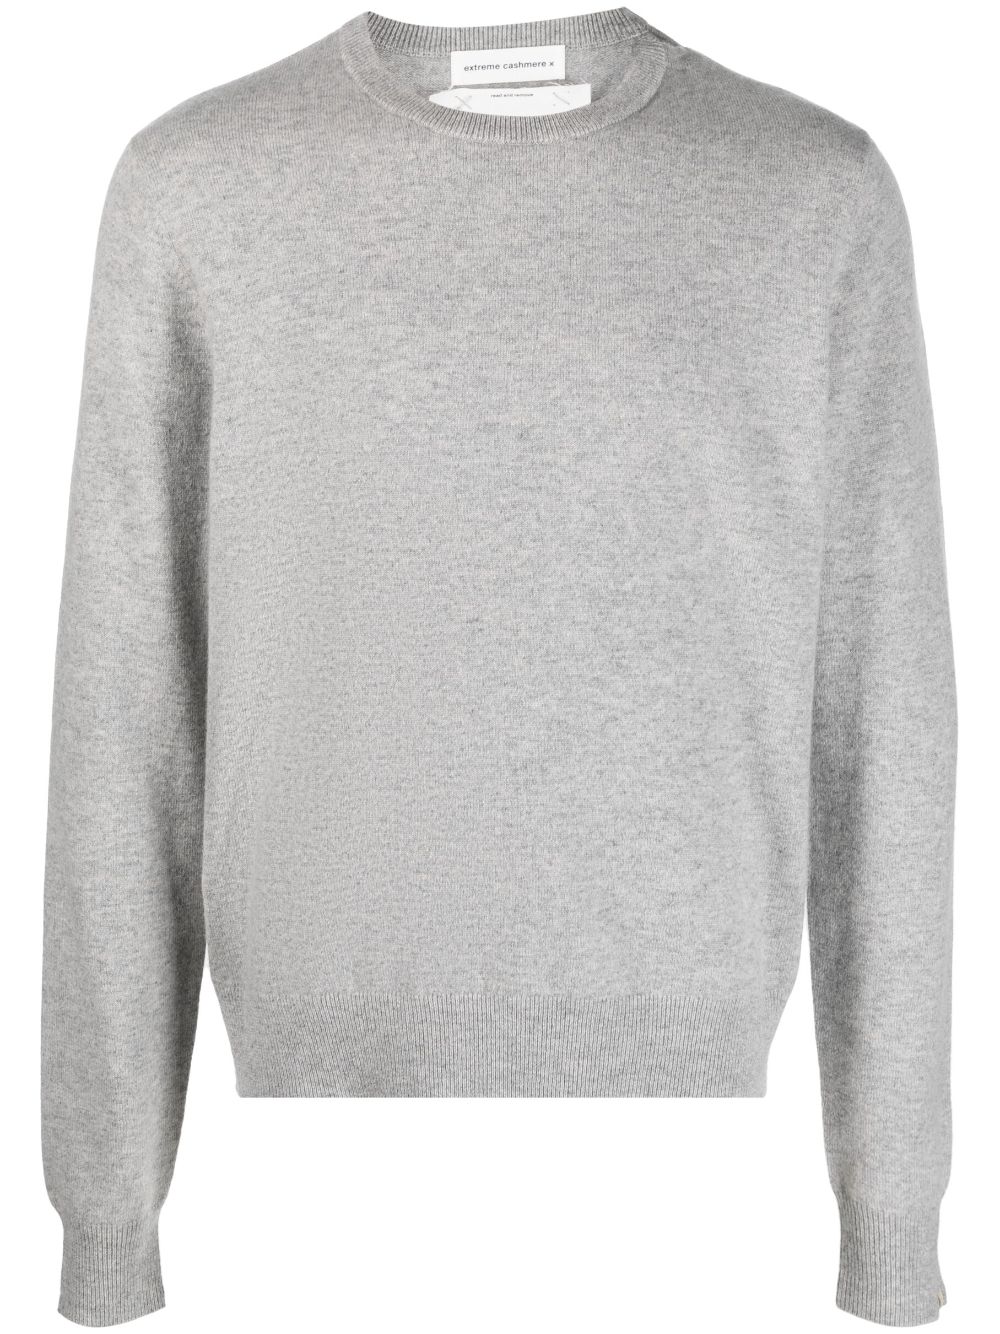 extreme cashmere n36 long-sleeved knitted jumper - Grey von extreme cashmere